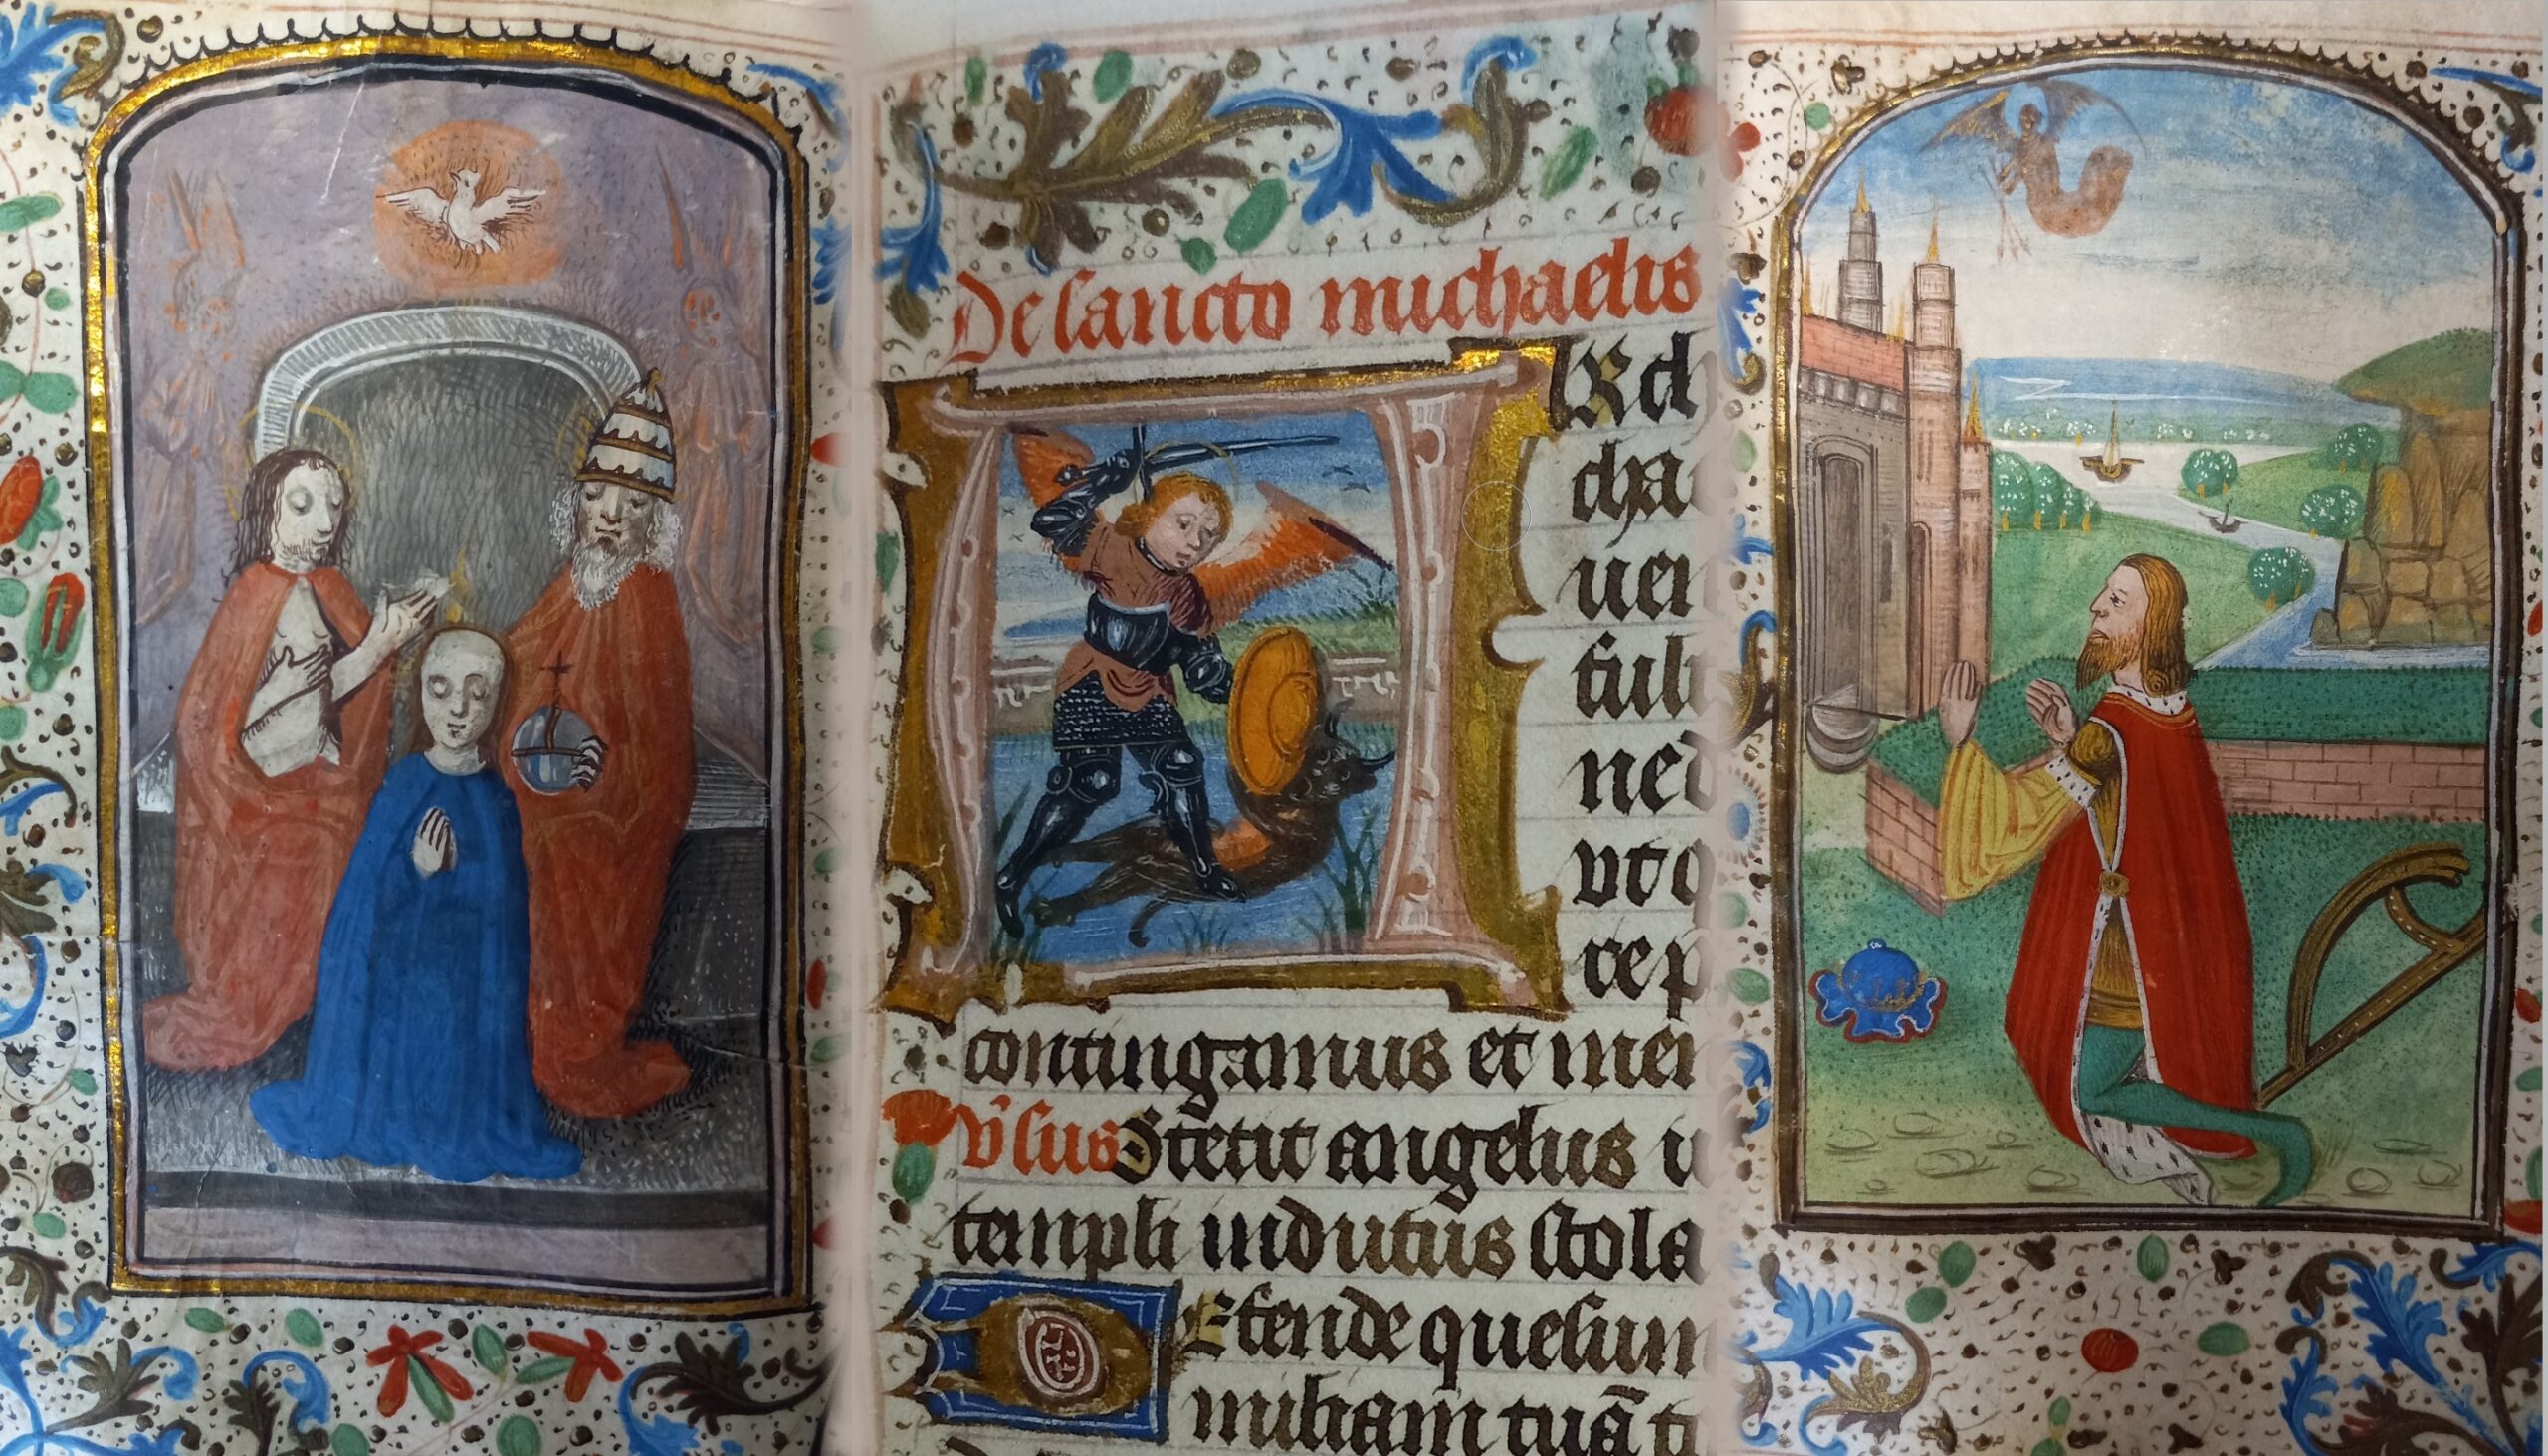 A young man puts a crown on a praying  woman's head; an old man holds an orb; a dove flies above them. A angel in armor with a sword and a shield stands on a beast. A man kneels in a prayer; a blue hat and a harp beside him.